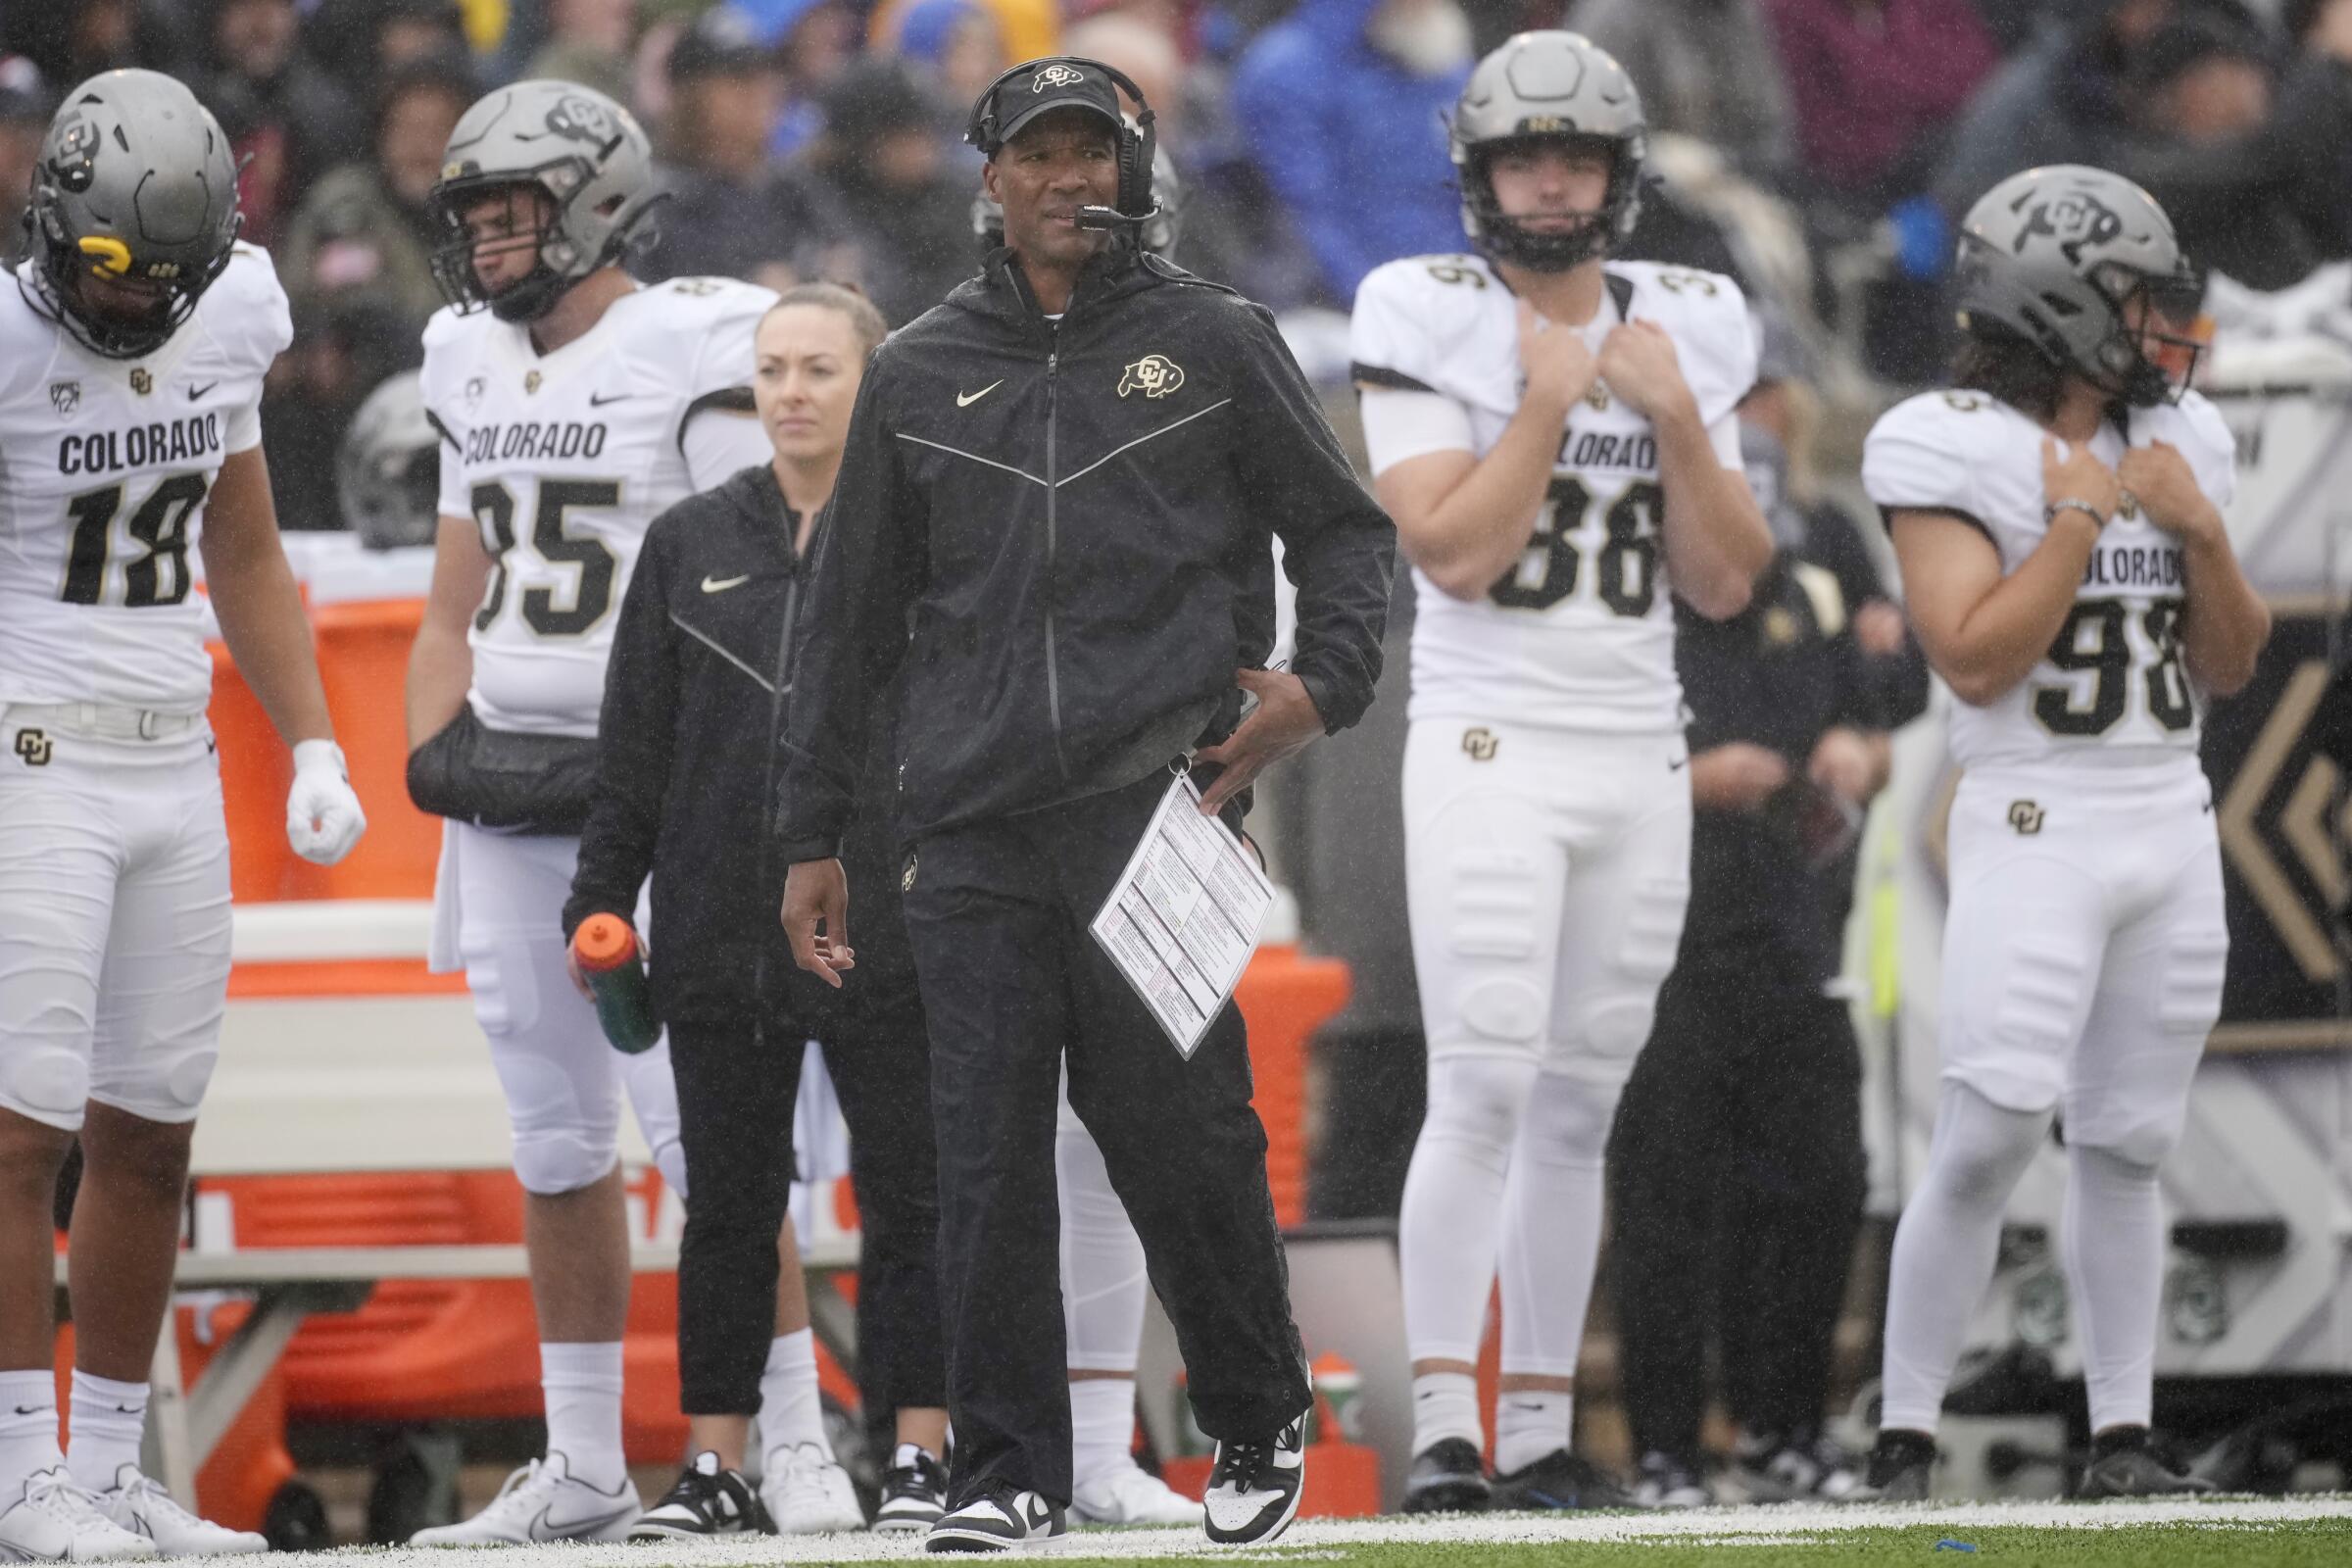 Colorado head coach Karl Dorrell stands on the sideline